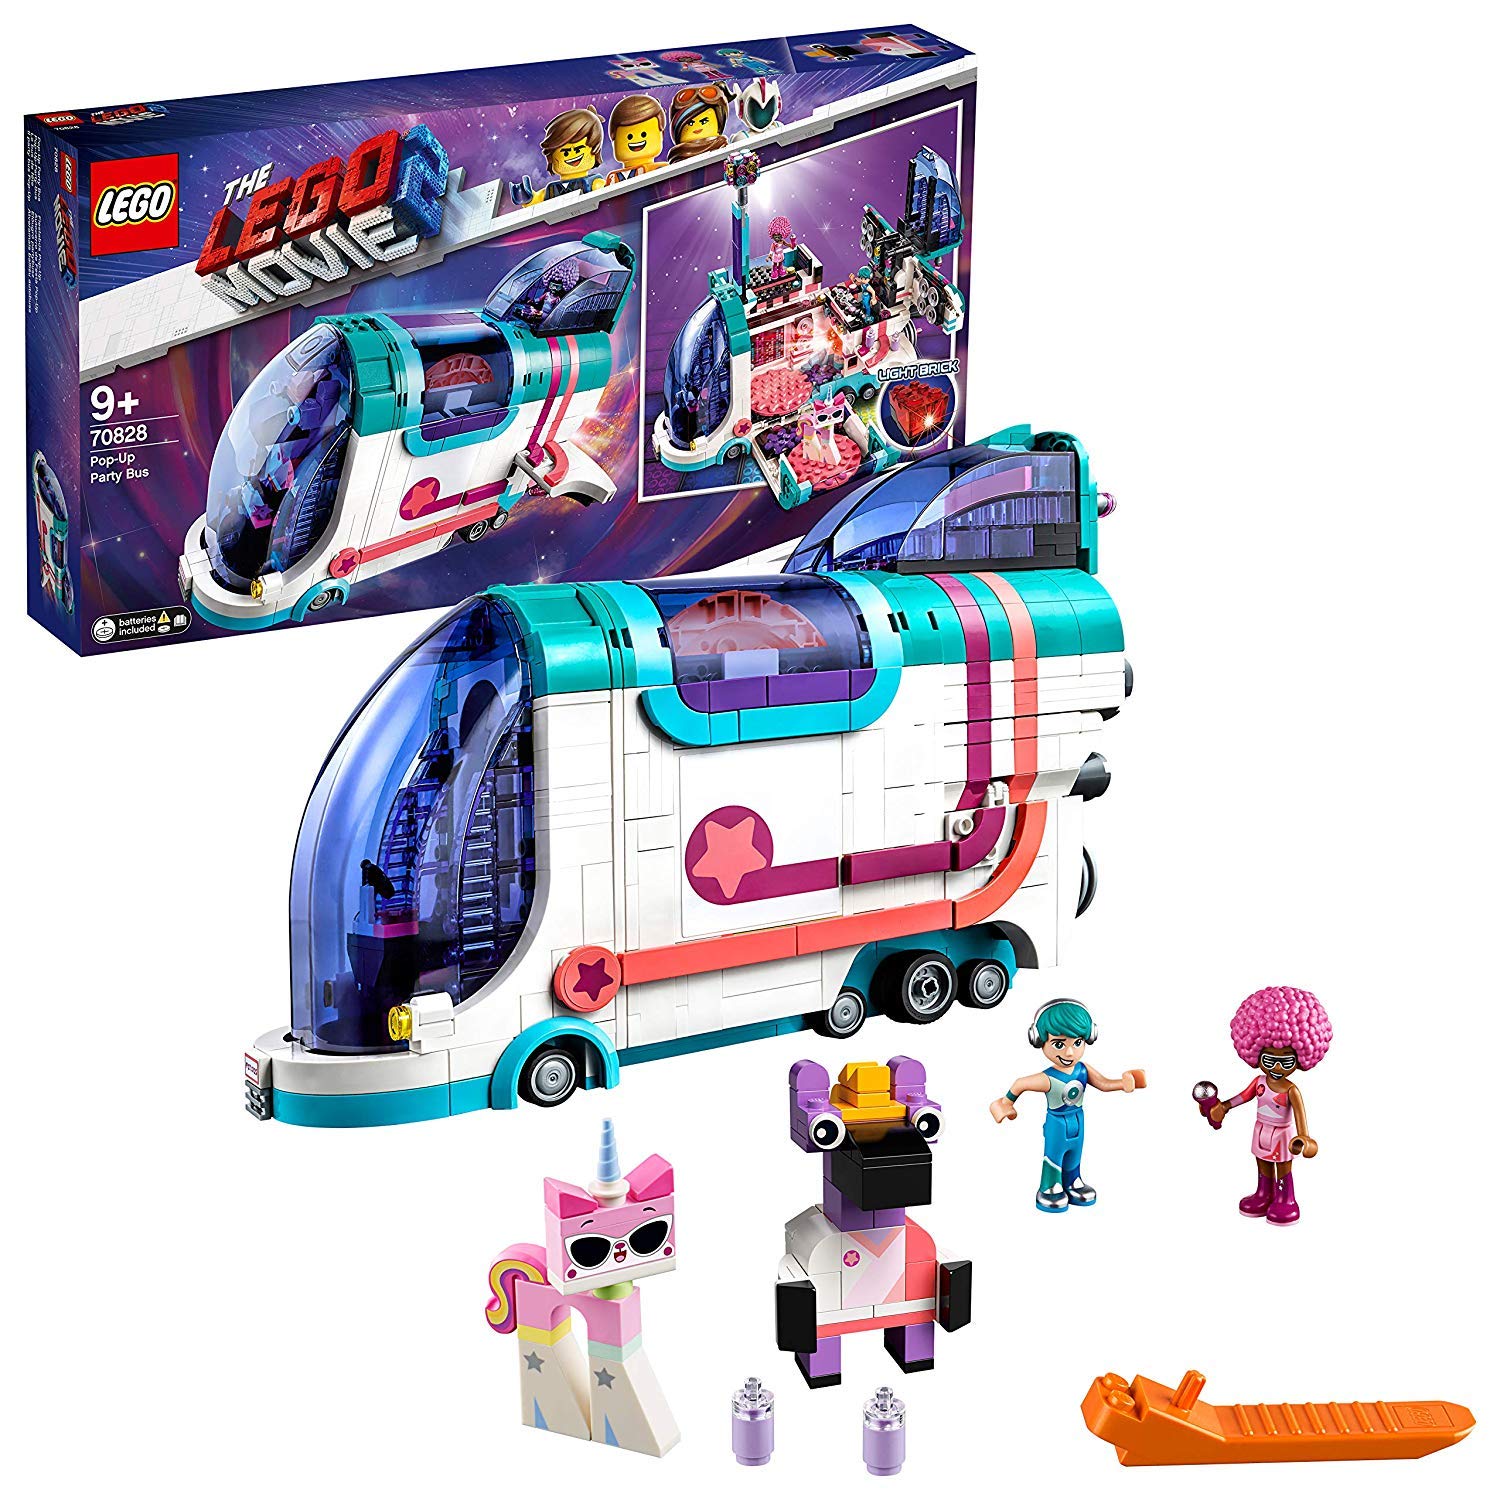 Honest Forwarder  The Lego Movie 2 70828 Pop-Up Party Bus